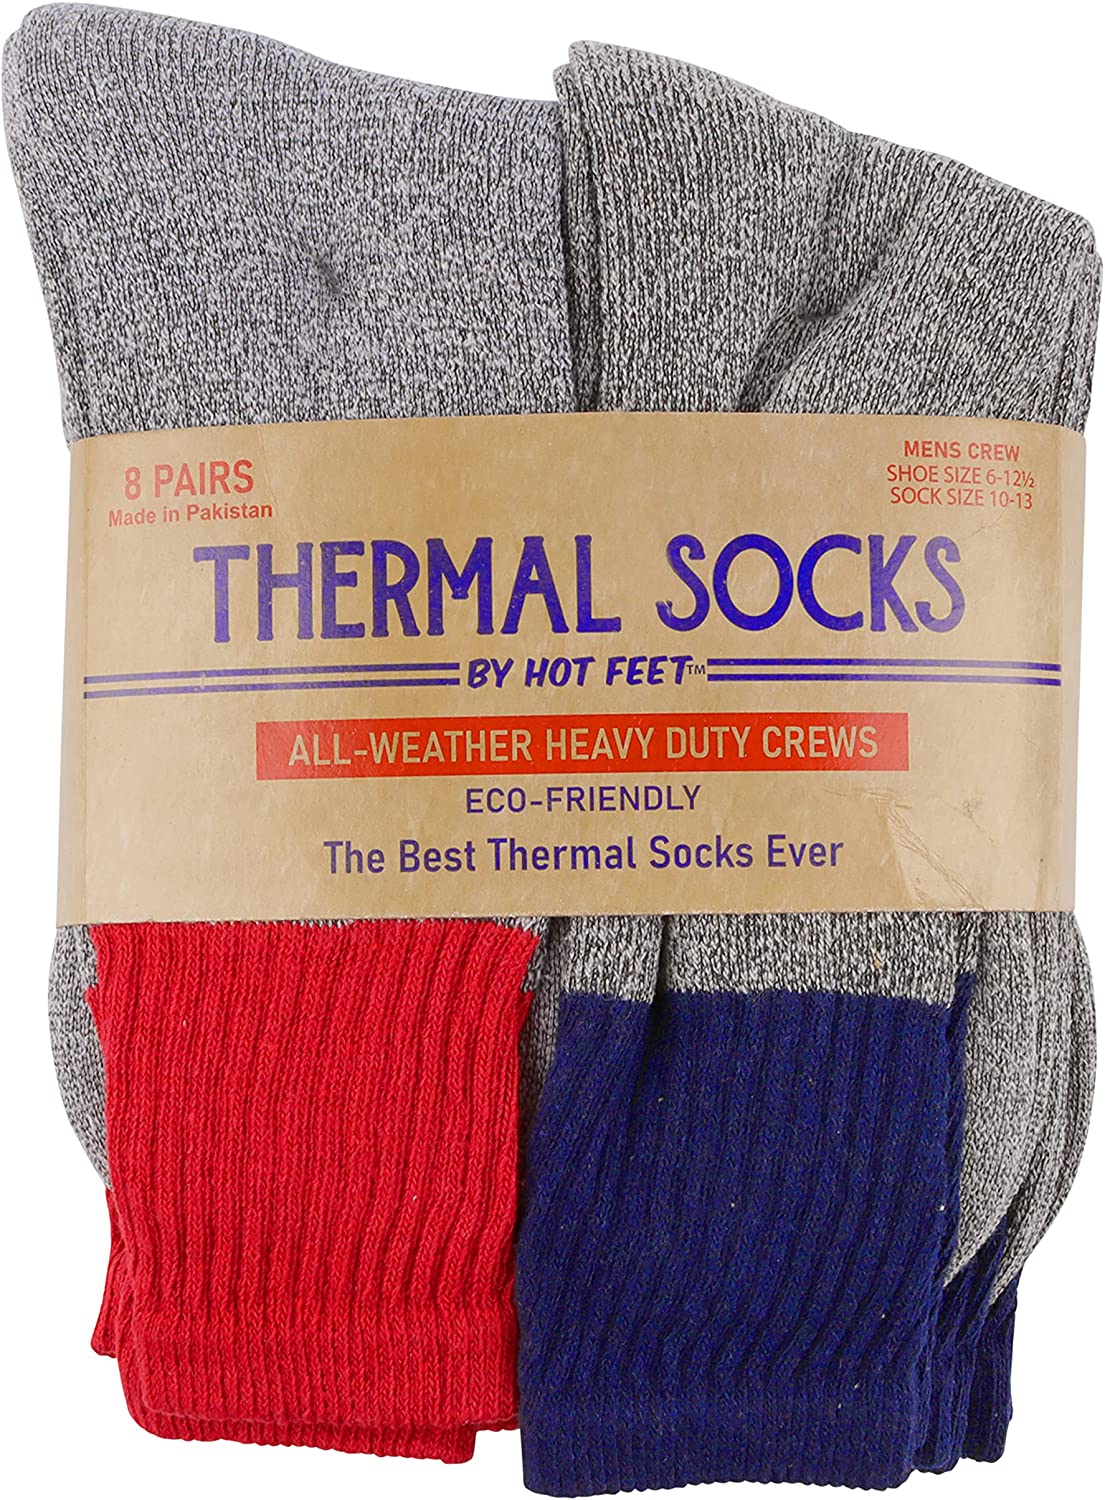 Hot Feet Outdoor 8-Pack Thermal Socks for Men, Thick Warm Socks for Extreme Cold Weather With Reinforced Heel and Toe Hiking Skiing Camping Hunting Crew Socks, Men’s Winter Socks for Shoe Sizes 6–12.5